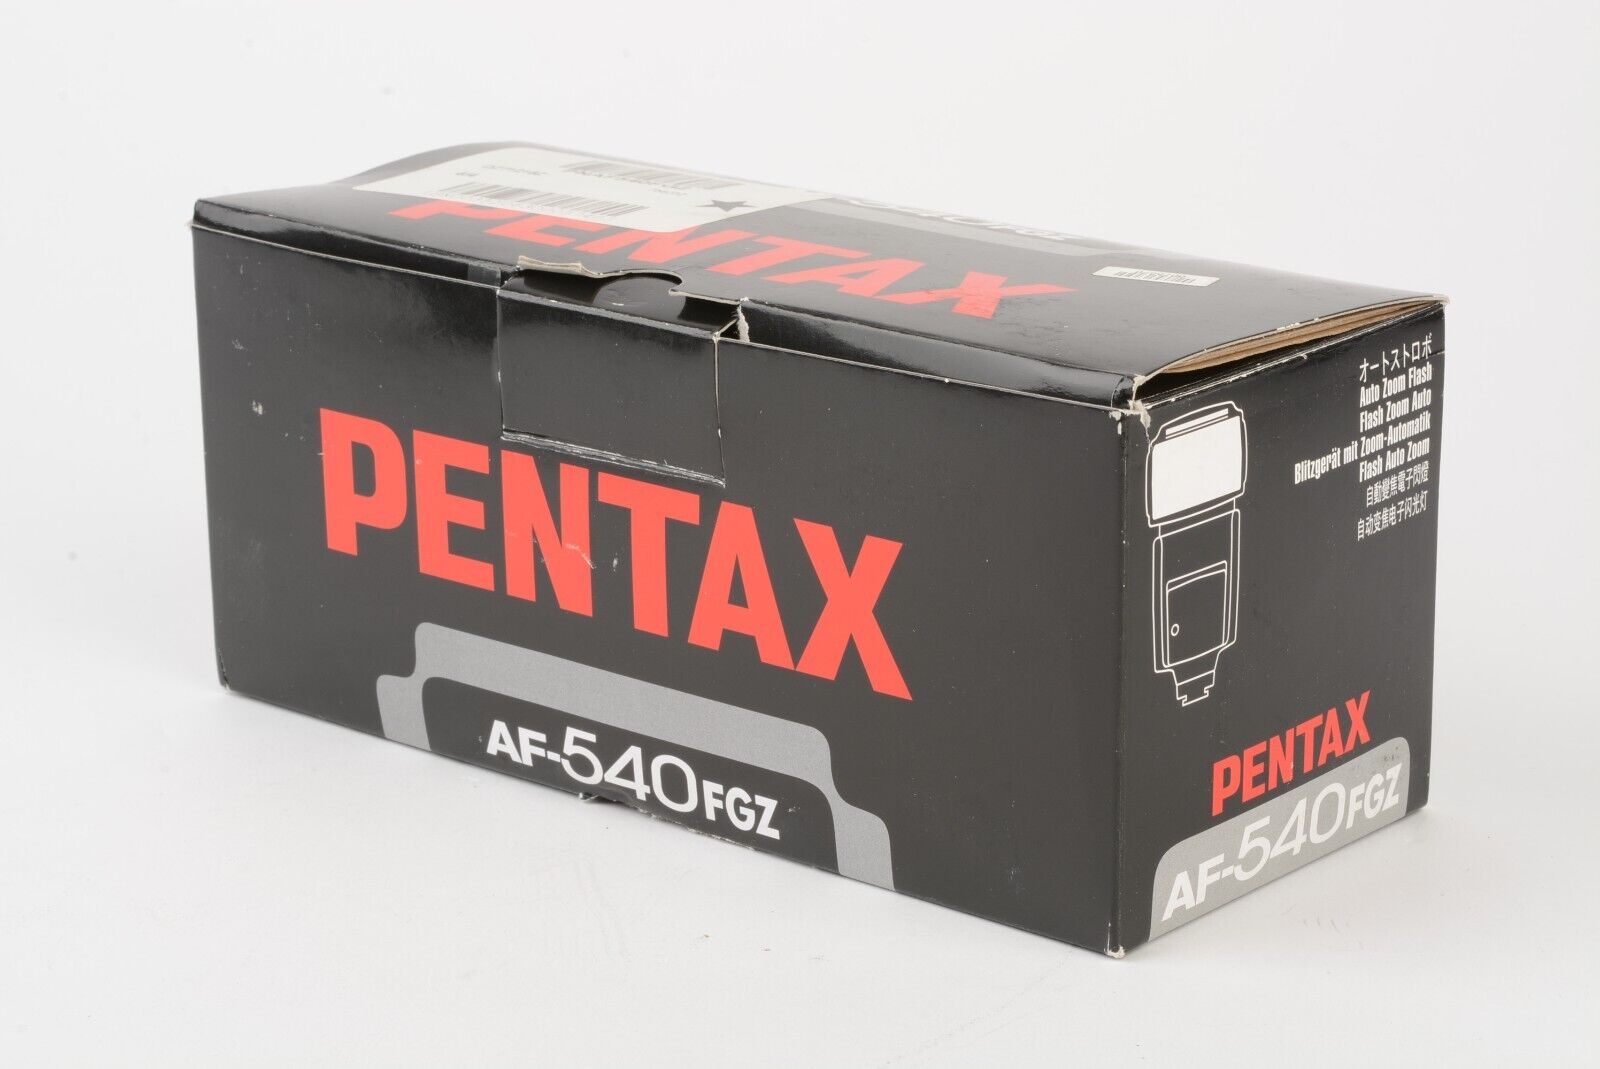 EXC++ PENTAX AF540FGZ SHOE MOUNT FLASH, BOXED, VERY CLEAN, FULLY